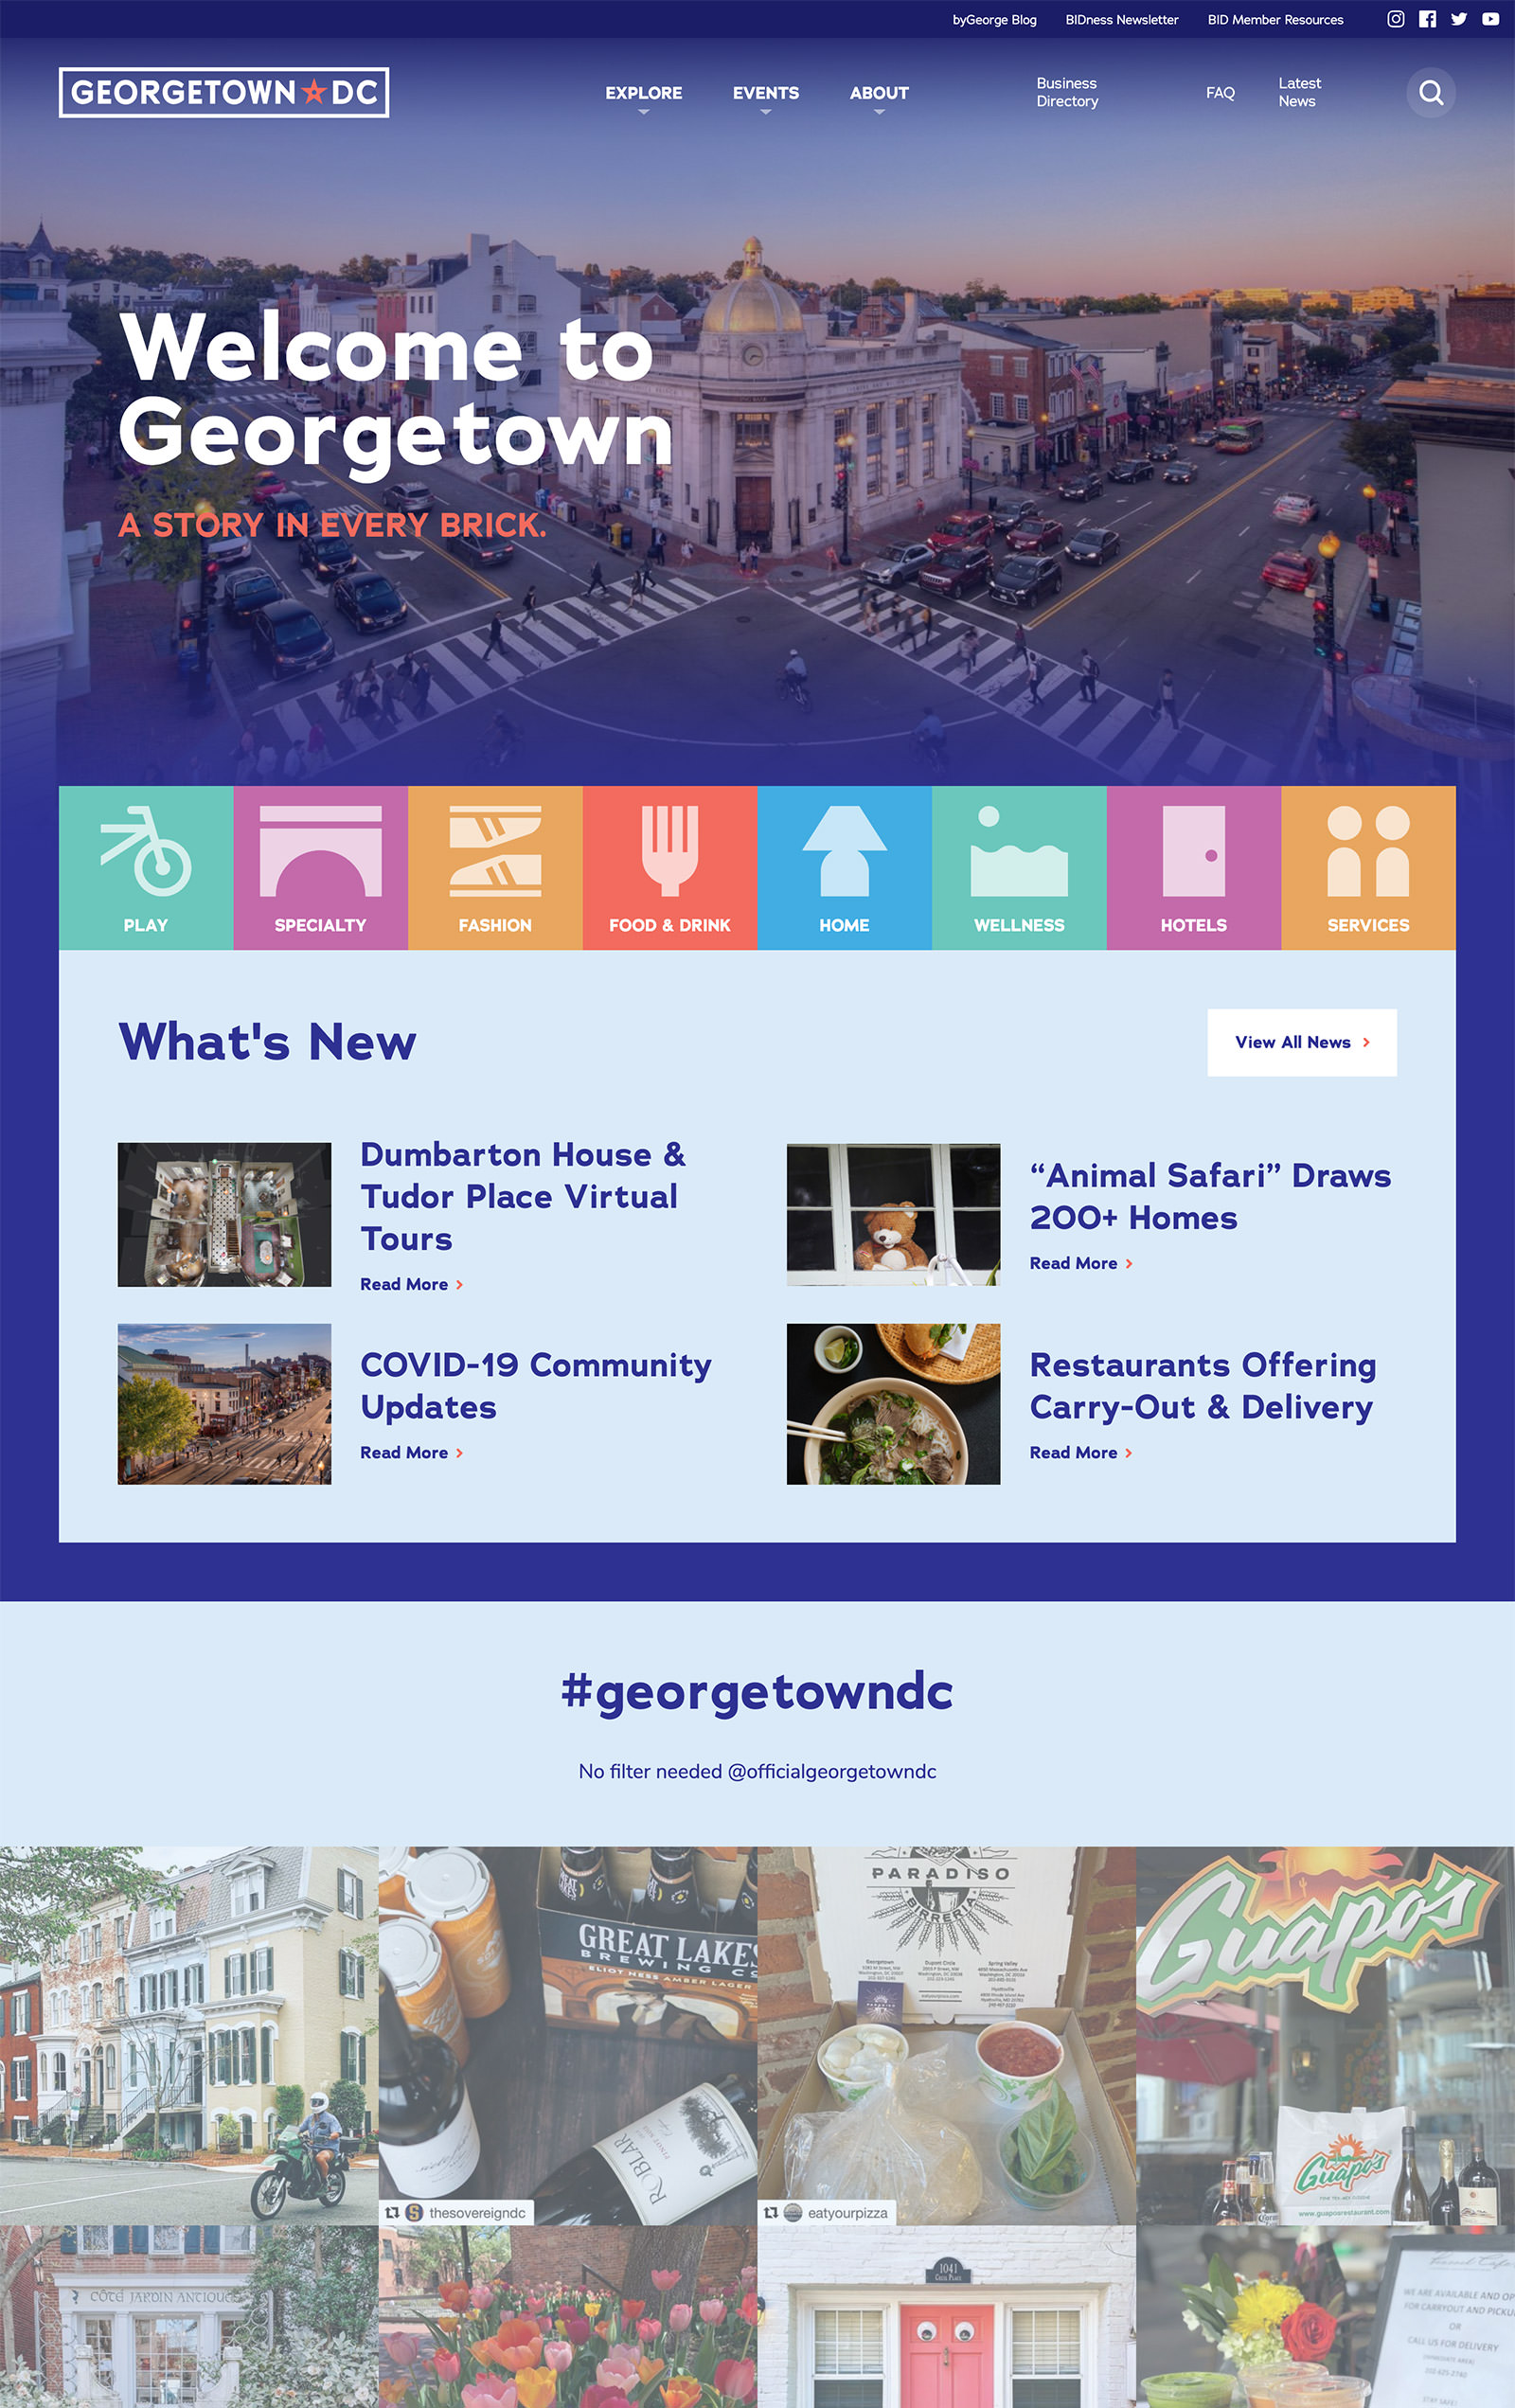 Homepage design for the Georgetown site